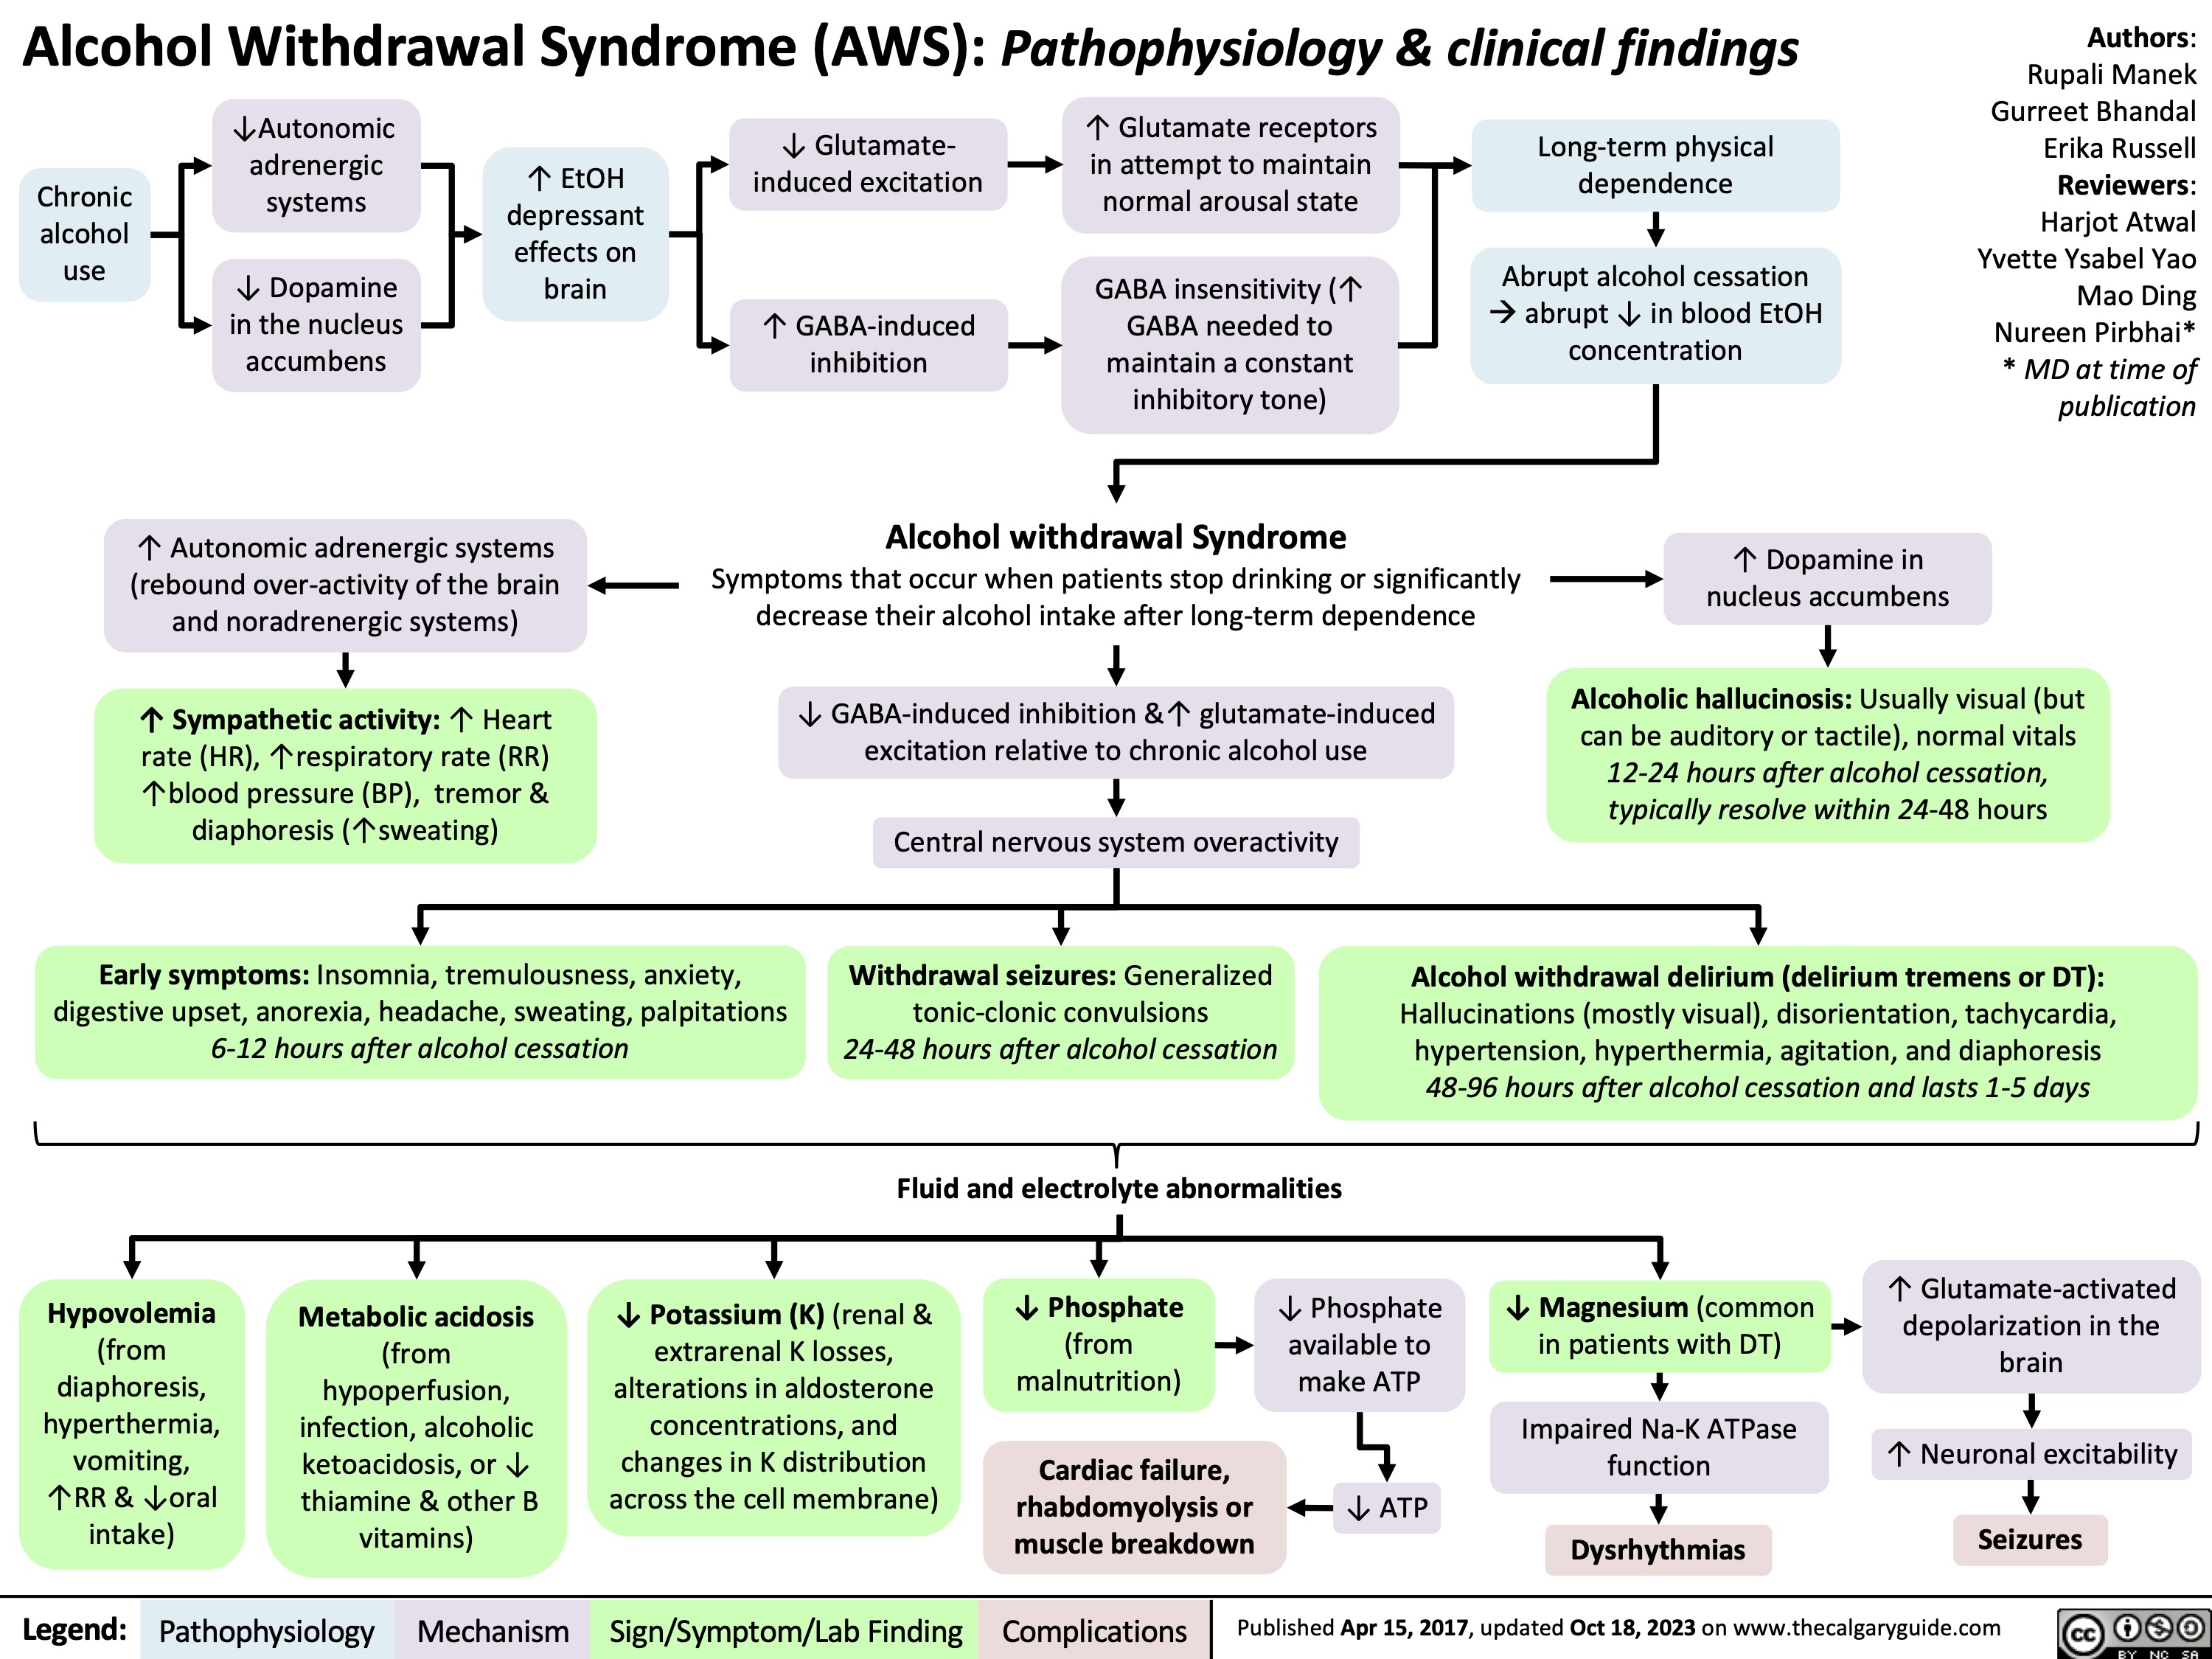 Alcohol Withdrawal Syndrome (AWS): Pathophysiology & clinical findings
Authors: Rupali Manek Gurreet Bhandal Erika Russell Reviewers: Harjot Atwal Yvette Ysabel Yao Mao Ding Nureen Pirbhai* * MD at time of publication
       Chronic alcohol use
↓Autonomic adrenergic systems
↓ Dopamine in the nucleus accumbens
↑ EtOH depressant effects on brain
↓ Glutamate- induced excitation
↑ GABA-induced inhibition
↑ Glutamate receptors in attempt to maintain normal arousal state
GABA insensitivity (↑ GABA needed to maintain a constant inhibitory tone)
Long-term physical dependence
Abrupt alcohol cessation àabrupt ↓ in blood EtOH concentration
        Alcohol withdrawal Syndrome
Symptoms that occur when patients stop drinking or significantly decrease their alcohol intake after long-term dependence
↓ GABA-induced inhibition &↑ glutamate-induced excitation relative to chronic alcohol use
Central nervous system overactivity
Withdrawal seizures: Generalized tonic-clonic convulsions 24-48 hours after alcohol cessation
Fluid and electrolyte abnormalities
 ↑ Autonomic adrenergic systems (rebound over-activity of the brain and noradrenergic systems)
↑ Sympathetic activity: ↑ Heart rate (HR), ↑respiratory rate (RR) ↑blood pressure (BP), tremor & diaphoresis (↑sweating)
Early symptoms: Insomnia, tremulousness, anxiety, digestive upset, anorexia, headache, sweating, palpitations 6-12 hours after alcohol cessation
↑ Dopamine in nucleus accumbens
   Alcoholic hallucinosis: Usually visual (but can be auditory or tactile), normal vitals 12-24 hours after alcohol cessation, typically resolve within 24-48 hours
        Alcohol withdrawal delirium (delirium tremens or DT):
Hallucinations (mostly visual), disorientation, tachycardia, hypertension, hyperthermia, agitation, and diaphoresis 48-96 hours after alcohol cessation and lasts 1-5 days
          Hypovolemia
(from diaphoresis, hyperthermia, vomiting, ↑RR & ↓oral intake)
Metabolic acidosis
(from hypoperfusion, infection, alcoholic ketoacidosis, or ↓
thiamine & other B vitamins)
↓ Potassium (K) (renal & extrarenal K losses, alterations in aldosterone concentrations, and changes in K distribution across the cell membrane)
↓ Phosphate
(from malnutrition)
Cardiac failure, rhabdomyolysis or muscle breakdown
↓ Phosphate available to make ATP
↓ ATP
↓ Magnesium (common in patients with DT)
Impaired Na-K ATPase function
Dysrhythmias
↑ Glutamate-activated depolarization in the brain
↑ Neuronal excitability
Seizures
      Legend:
 Pathophysiology
Mechanism
Sign/Symptom/Lab Finding
 Complications
 Published Apr 15, 2017, updated Oct 18, 2023 on www.thecalgaryguide.com
   
Alcohol Withdrawal Syndrome (AWS): Pathophysiology & clinical findings
Authors: Rupali Manek Gurreet Bhandal Erika Russell Reviewers: Harjot Atwal Yvette Ysabel Yao Mao Ding Nureen Pirbhai* * MD at time of publication
       Chronic alcohol use
↓Autonomic adrenergic systems
↓ Dopamine in the nucleus accumbens
↑ EtOH depressant effects on brain
↓ Glutamate- induced excitation
↑ GABA-induced inhibition
↑ Glutamate receptors in attempt to maintain normal arousal state
GABA insensitivity (↑ GABA needed to maintain a constant inhibitory tone)
Long-term physical dependence
Abrupt alcohol cessation àabrupt ↓ in blood EtOH concentration
        Alcohol withdrawal Syndrome
Symptoms that occur when patients stop drinking or significantly decrease their alcohol intake after long-term dependence
↓ GABA-induced inhibition &↑ glutamate-induced excitation relative to chronic alcohol use
Central nervous system overactivity
Withdrawal seizures: Generalized tonic-clonic convulsions 24-48 hours after alcohol cessation
Fluid and electrolyte abnormalities
 ↑ Autonomic adrenergic systems (rebound over-activity of the brain and noradrenergic systems)
↑ Sympathetic activity: ↑ Heart rate (HR), ↑respiratory rate (RR) ↑blood pressure (BP), tremor & diaphoresis (↑sweating)
Early symptoms: Insomnia, tremulousness, anxiety, digestive upset, anorexia, headache, sweating, palpitations 6-12 hours after alcohol cessation
↑ Dopamine in nucleus accumbens
   Alcoholic hallucinosis: Usually visual (but can be auditory or tactile), normal vitals 12-24 hours after alcohol cessation, typically resolve within 24-48 hours
        Alcohol withdrawal delirium (delirium tremens or DT):
Hallucinations (mostly visual), disorientation, tachycardia, hypertension, hyperthermia, agitation, and diaphoresis 48-96 hours after alcohol cessation and lasts 1-5 days
         Hypovolemia
(from diaphoresis, hyperthermia, vomiting, ↑RR & ↓oral intake)
Metabolic acidosis
(from hypoperfusion, infection, alcoholic ketoacidosis, or ↓ thiamine & other B vitamins)
↓ Potassium (K) (renal & extrarenal K losses, alterations in aldosterone concentrations, and changes in K distribution across the cell membrane)
↓ Magnesium (common in patients with DT)
Dysrhythmias, seizures
↓ Phosphate
(from malnutrition)
↓ Phosphate available to make ATP
↓ ATP
   Cardiac failure, rhabdomyolysis or muscle breakdown
  Legend:
 Pathophysiology
Mechanism
Sign/Symptom/Lab Finding
 Complications
 Published April 28th, 2014 on www.thecalgaryguide.com
   
Alcohol Withdrawal: Pathophysiology & clinical findings
Authors: Erika Russell Rupali Manek Gurreet Bhandal Reviewers: Yvette Ysabel Yao Harjot Atwal Nureen Pirbhai* * MD at time of publication
   ↓Autonomic adrenergic systems
↓ Glutamate-induced excitation
Chronic alcohol use
↑ EtOH depressant effects on brain
↓ Dopamine in the nucleus accumbens
↑ GABA-induced inhibition
           ↑ Glutamate receptors in attempt to maintain normal arousal state GABA insensitivity (↑ GABA needed to maintain a constant inhibitory tone)
      ↑ Autonomic adrenergic systems (rebound over- activity of the brain and noradrenergic systems)
↑ Sympathetic activity: ↑ Heart rate (HR), ↑respiratory rate (RR) ↑blood pressure (BP), tremor & diaphoresis (↑sweating)
Physical dependence due to chronic alcohol use
Abrupt alcohol cessation
Abrupt ↓ in blood EtOH concentration
Alcohol withdrawal
↓ GABA-induced inhibition &↑ glutamate-induced excitation relative to chronic alcohol use
Central nervous system overactivity
Withdrawal seizures: Generalized tonic-clonic convulsions 24-48 hours after alcohol cessation
Fluid and electrolyte abnormalities
↑ Dopamine in nucleus accumbens
Alcoholic hallucinosis: Usually visual (but can be auditory or tactile), normal vitals
12-24 hours after alcohol cessation, typically resolve within 24-48 hours
            Early symptoms: Insomnia, tremulousness, anxiety, digestive upset, anorexia, headache, sweating, palpitations 6-12 hours after alcohol cessation
Alcohol withdrawal delirium (delirium tremens or DT):
Hallucinations (mostly visual), disorientation, tachycardia, hypertension, hyperthermia, agitation, and diaphoresis 48-96 hours after alcohol cessation and lasts 1-5 days
          Hypovolemia (from diaphoresis, hyperthermia, vomiting,
↑RR & ↓oral intake)
Metabolic acidosis (from
hypoperfusion, infection, alcoholic ketoacidosis, or ↓ thiamine & other B vitamins)
↓ Potassium (K) (renal & extrarenal K losses, alterations in aldosterone concentrations, and changes in K distribution across the cell membrane)
↓ Magnesium (common in patients with DT)
Dysrhythmias, seizures
↓ Phosphate (from malnutrition)
↓ Phosphate available to make ATP
↓ ATP
Cardiac failure, rhabdomyolysis or muscle breakdown
   Legend:
 Pathophysiology
Mechanism
Sign/Symptom/Lab Finding
 Complications
 Published April 28th, 2014 on www.thecalgaryguide.com
   
Authors: Erika Russell Rupali Manek Gurreet Bhandal Reviewers: ↓Autonomic adrenergic systems ↓ Dopamine in the nucleus accumbens Yvette Ysabel Yao Harjot Atwal Nureen Pirbhai* * MD at time of publication
Alcohol Withdrawal: Pathophysiology & clinical findings Chronic alcohol use
       ↑ EtOH depressant effects on brain
    ↓ Glutamate-induced excitation ↑ GABA-induced inhibition
↑ Glutamate receptors in attempt to maintain normal arousal state GABA insensitivity (↑ GABA needed to maintain a constant inhibitory tone)
        ↑ Autonomic adrenergic systems (rebound over- activity of the brain and noradrenergic systems)
↑ Sympathetic activity: ↑ Heart rate (HR), ↑respiratory rate (RR) ↑blood pressure (BP), tremor & diaphoresis (↑sweating)
Physical dependence due to chronic alcohol use
Abrupt alcohol cessation
Abrupt ↓ in blood EtOH concentration Alcohol withdrawal
↓ GABA-induced inhibition &↑ Glutamate-induced excitation relative to chronic alcohol use
Central nervous system overactivity
Withdrawal seizures: Generalized tonic-clonic convulsions 24-48 hours after alcohol cessation
Fluid and electrolyte abnormalities
↓ Potassium (K) (renal & extrarenal K losses, alterations in aldosterone concentrations, and changes in K distribution across the cell membrane)
↑ Dopamine in nucleus accumbens
Alcoholic hallucinosis: Usually visual (but can be auditory or tactile), normal vitals
12-24 hours after alcohol cessation, typically resolve within 24-48 hours
Alcohol withdrawal delirium (delirium tremens or DT):
Hallucinations (mostly visual), disorientation, tachycardia, hypertension, hyperthermia, agitation, and diaphoresis 48-96 hours after alcohol cessation and lasts 1-5 days
            Early symptoms: Insomnia, tremulousness, anxiety, digestive upset, anorexia, headache, sweating, palpitations 6-12 hours after alcohol cessation
         Hypovolemia (from diaphoresis, hyperthermia, vomiting, ↑RR & ↓oral intake)
Metabolic acidosis (from
hypoperfusion, infection, alcoholic ketoacidosis, or ↓ thiamine & other B vitamins)
↓ Magnesium (common in patients with DT)
Dysrhythmias, seizures
↓ Phosphate (from malnutrition) Cardiac failure, rhabdomyolysis
  or muscle breakdown
 Legend:
 Pathophysiology
Mechanism
Sign/Symptom/Lab Finding
 Complications
 Published April 28th, 2014 on www.thecalgaryguide.com
   
Alcohol Withdrawal: Pathophysiology & clinical findings Chronic alcohol use
↓ Dopamine in the nucleus accumbens ↓Autonomic adrenergic systems
Authors: Erika Russell Rupali Manek Gurreet Bhandal Reviewers: Yvette Ysabel Yao Harjot Atwal ↑ GABA-induced inhibition Nureen Pirbhai* * MD at time of publication
     ↑ EtOH depressant effects on brain
    ↓ Glutamate-induced excitation
↑ Glutamate receptors in attempt to maintain normal arousal state
GABA insensitivity (↑ GABA needed to maintain a constant inhibitory tone)
        ↑ Autonomic adrenergic systems (rebound over- activity of the brain and noradrenergic systems)
↑ Sympathetic activity: ↑Heart rate (HR), ↑respiratory rate (RR) ↑blood pressure (BP), tremor & diaphoresis (↑sweating)
Physical dependence due to chronic alcohol use
Abrupt alcohol cessation
Abrupt ↓ in blood EtOH concentration Alcohol withdrawal
↓ GABA-induced inhibition &↑ Glutamate-induced excitation relative to chronic alcohol use
Central nervous system overactivity
Withdrawal seizures: Generalized tonic-clonic convulsions 24-48 hours after alcohol cessation
Fluid and electrolyte abnormalities
↑ Dopamine in nucleus accumbens
Alcoholic hallucinosis: Usually visual (but can be auditory or tactile), normal vitals
12-24 hours after alcohol cessation, typically resolve within 24-48 hours
Alcohol withdrawal delirium (delirium tremens or DT):
Hallucinations (mostly visual), disorientation, tachycardia, hypertension, hyperthermia, agitation, and diaphoresis 48-96 hours after alcohol cessation and lasts 1-5 days
            Early symptoms: Insomnia, tremulousness, anxiety, digestive upset, anorexia, headache, sweating, palpitations 6-12 hours after alcohol cessation
          Hypovolemia (from diaphoresis, hyperthermia, vomiting, ↑RR & ↓oral intake)
Metabolic acidosis (from
hypoperfusion, infection, alcoholic ketoacidosis, or ↓ thiamine & other B vitamins)
↓ Potassium (K) (renal & extrarenal K losses, alterations in aldosterone concentrations, and changes in K distribution across the cell membrane)
↓ Magnesium
(common in patients with DT)
Dysrhythmias, seizures
↓ Phosphate (from malnutrition)
Cardiac failure, rhabdomyolysis or muscle breakdown
  Legend:
 Pathophysiology
Mechanism
Sign/Symptom/Lab Finding
 Complications
 Published April 28th, 2014 on www.thecalgaryguide.com
   
Alcohol Withdrawal: Pathophysiology & clinical findings
Authors: Erika Russell Rupali Manek Gurreet Bhandal Reviewers: Yvette Ysabel Yao Harjot Atwal Nureen Pirbhai* * MD at time of publication
 ↑ EtOH depressant effects on brain
↓ Glutamate-induced excitation
↑ Glutamate receptors in attempt to maintain normal arousal state
Chronic alcohol use
↑ GABA-induced inhibition
GABA insensitivity (↑ GABA needed to maintain a constant inhibitory tone)
↓ Dopamine in the nucleus accumbens ↓Autonomic adrenergic systems
Abrupt alcohol cessation
              Physical dependence due to chronic alcohol use
 Alcohol withdrawal
↓ GABA-induced inhibition &↑ Glutamate-induced excitation relative to chronic alcohol use
Central nervous system overactivity
Withdrawal seizures: Generalized tonic-clonic convulsions 24-48 hours after alcohol cessation
   ↑ Autonomic adrenergic systems (rebound over-activity of the brain and noradrenergic systems)
↑ Sympathetic activity: ↑HR, ↑RR ↑BP, tremor & diaphoresis (↑sweating)
Early symptoms: Insomnia, tremulousness, anxiety, digestive upset, anorexia, headache, sweating, palpitations
6-12 hours after alcohol cessation
↑ Dopamine in nucleus accumbens
Alcoholic hallucinosis: Usually visual (but can be auditory or tactile), normal vitals
12-24 hours after alcohol cessation, typically resolve within 24-48 hours
Alcohol withdrawal delirium (delirium tremens or DT):
Hallucinations (predominately visual), disorientation, tachycardia, hypertension, hyperthermia, agitation, and diaphoresis 48-96 hours after alcohol cessation and lasts 1-5 days
           Fluid and electrolyte abnormalities
        Hypovolemia (from diaphoresis, hyperthermia, vomiting, ↑ RR & ↓
oral intake)
Metabolic acidosis (from
hypoperfusion, infection, alcoholic ketoacidosis, or ↓ thiamine & other B vitamins)
↓ Potassium (K) (renal & extrarenal K losses, alterations in aldosterone concentrations, and changes in K distribution across the cell membrane)
↓ Magnesium
(common in patients with DT)
Dysrhythmias, seizures
↓ Phosphate (from malnutrition)
Cardiac failure, rhabdomyolysis or muscle breakdown
   Legend:
 Pathophysiology
Mechanism
Sign/Symptom/Lab Finding
 Complications
 Published April 28th, 2014 on www.thecalgaryguide.com
   
Alcohol Withdrawal: Pathophysiology & clinical findings
Authors: Erika Russell Rupali Manek Gurreet Bhandal Reviewers: Yvette Ysabel Yao Harjot Atwal Nureen Pirbhai* * MD at time of publication
↓ GABA-induced inhibition &↑ Glutamate-induced excitation relative to chronic alcohol use
CNS overactivity
Alcohol withdrawal delirium (delirium tremens or DT): Hallucinations (predominately visual), disorientation, tachycardia, hypertension, hyperthermia, agitation, and diaphoresis
48-96 hours after alcohol cessation and lasts 1-5 days
 Alcohol cessation ↓ Dopamine
Alcohol withdrawal
   Chronic alcohol use
↑ EtOH depressant effects on brain
in the NAc
↓Autonomic adrenergic systems
↑ Dopamine in nucleus accumbens
(NAc) relative to chronic alcohol use
Alcoholic hallucinosis: Usually visual (but can be auditory or tactile), normal vitals 12-24 hours after alcohol cessation, typically resolve within 24-48 hours
↑ Autonomic adrenergic systems relative to chronic alcohol use
↑ Sympathetic activity: ↑HR, ↑RR ↑BP, tremor & diaphoresis (↑sweating)
               ↓ Glutamate- induced excitation
↑ Glutamate receptors in attempt to maintain normal arousal state
↑ GABA-induced inhibition
GABA insensitivity (↑ GABA needed to maintain a constant inhibitory tone)
Early symptoms: Insomnia, tremulousness, anxiety, digestive upset, anorexia, headache, sweating, palpitations
6-12 hours after alcohol cessation
Withdrawal seizures: Generalized tonic- clonic convulsions 24-48 hours after alcohol cessation
        Fluid and electrolyte abnormalities
    Abbreviations:
CNS – Central nervous system K – Potassium
DT – Delirium tremens
Mg – Magnesium
NAc – Nucleus accumbens NMDA – N-methyl-D-aspartate EtOH – Alcohol
NT – Neurotransmitter
Hypovolemia (from diaphoresis, hyperthermia, vomiting, ↑ RR & ↓
oral intake)
Metabolic acidosis (from hypoperfusion, infection, alcoholic ketoacidosis, or ↓
thiamine & other B vitamins)
↓ K (renal & extrarenal K losses, alterations in aldosterone concentrations, and changes in K distribution across the cell membrane)
↓ Mg (common in patients with DT)
Dysrhythmias, seizures
↓ Phosphate (from malnutrition)
Cardiac failure, rhabdomyolysis or muscle breakdown
        Legend:
 Pathophysiology
Mechanism
Sign/Symptom/Lab Finding
 Complications
 Published April 28th, 2014 on www.thecalgaryguide.com
   
 Alcohol Withdrawal: Clinical Findings and Complications
Authors: Erika Russell Reviewers: Harjot Atwal Nureen Pirbhai* * MD at time of publication
Note: *The onset of alcohol withdrawal generally begins 6-24 hours after the last drink with symptoms peaking between 24-36 hours after and gradually lessening.
Symptoms typically progress from early symptoms and increased sympathetic activityà hallucinationsàseizures àpotentially Delirium Tremens.
Alcohol withdrawal is mild-moderate in severity for 90% of patients. Those who progressively worsen however can enter Delirium Tremens (DT) which has a mortality rate of up to 20%. More likely to have DT if had DT before, age >30 years, concurrent illness, >2 days after EtOH cessation before seeking help, and history of sustained drinking.
  Long term, heavy alcohol use that leads to physical dependence
Abrupt ↓ in blood EtOH concentration
   Negative physiological reactions to ↓ alcohol intake
Adaptive suppression of GABA activity from chronic alcohol enhancement
Alcohol Withdrawal*
Withdrawal symptoms alleviated by ingesting alcohol
Alcohol taken to relieve withdrawal AND/OR
Social and internal relapse cues trigger urge to use alcohol
Blood EtOH levels >600 mg% can lead to lethal respiratory depression by suppressing the respiratory centers in the brainstem
          Upregulated autonomic adrenergic systems from chronic alcohol inhibition
Discontinuation of alcohol leads to rebound over-
activity of the brain and noradrenergic systems
Increased Sympathetic Activity Tachycardia, hypertension, tremor and diaphoresis
Generalized Tonic-Clonic Seizures
Usually begin within 8-24 hours of alcohol cessation and peak after 24 hours. Risk of having seizures ↑ with repeated withdrawals. 1/3 of people can progress to DT if seizures left untreated.
        Discontinuation of alcohol causes a sudden relative
deficiency in inhibitory GABA activity
Reduction in dopamine in the nucleus accumbens
(NAc) from chronic alcohol exposure
Discontinuation of alcohol causes a increase in dopamine levels in NAc
Hallucinations
Commonly visual (but can be auditory or tactile), develop 12-24 hours after alcohol cessation.
     Early Symptoms
Anxiety, insomnia, vivid dreams, anorexia, nausea, headache and psychomotor agitation
Delirium Tremens (DT)
Life-threatening state of greatly exaggerated withdrawal symptoms (severe tachycardia, diaphoresis etc.) with confusion/disorientation and hallucinations that generally appears 72-96 hours after the last drink and lasts 2-3 days.
     Legend:
Published MONTH, DAY, YEAR on www.thecalgaryguide.com
 Pathophysiology
Mechanism
Sign/Symptom/Lab Finding
Complications
